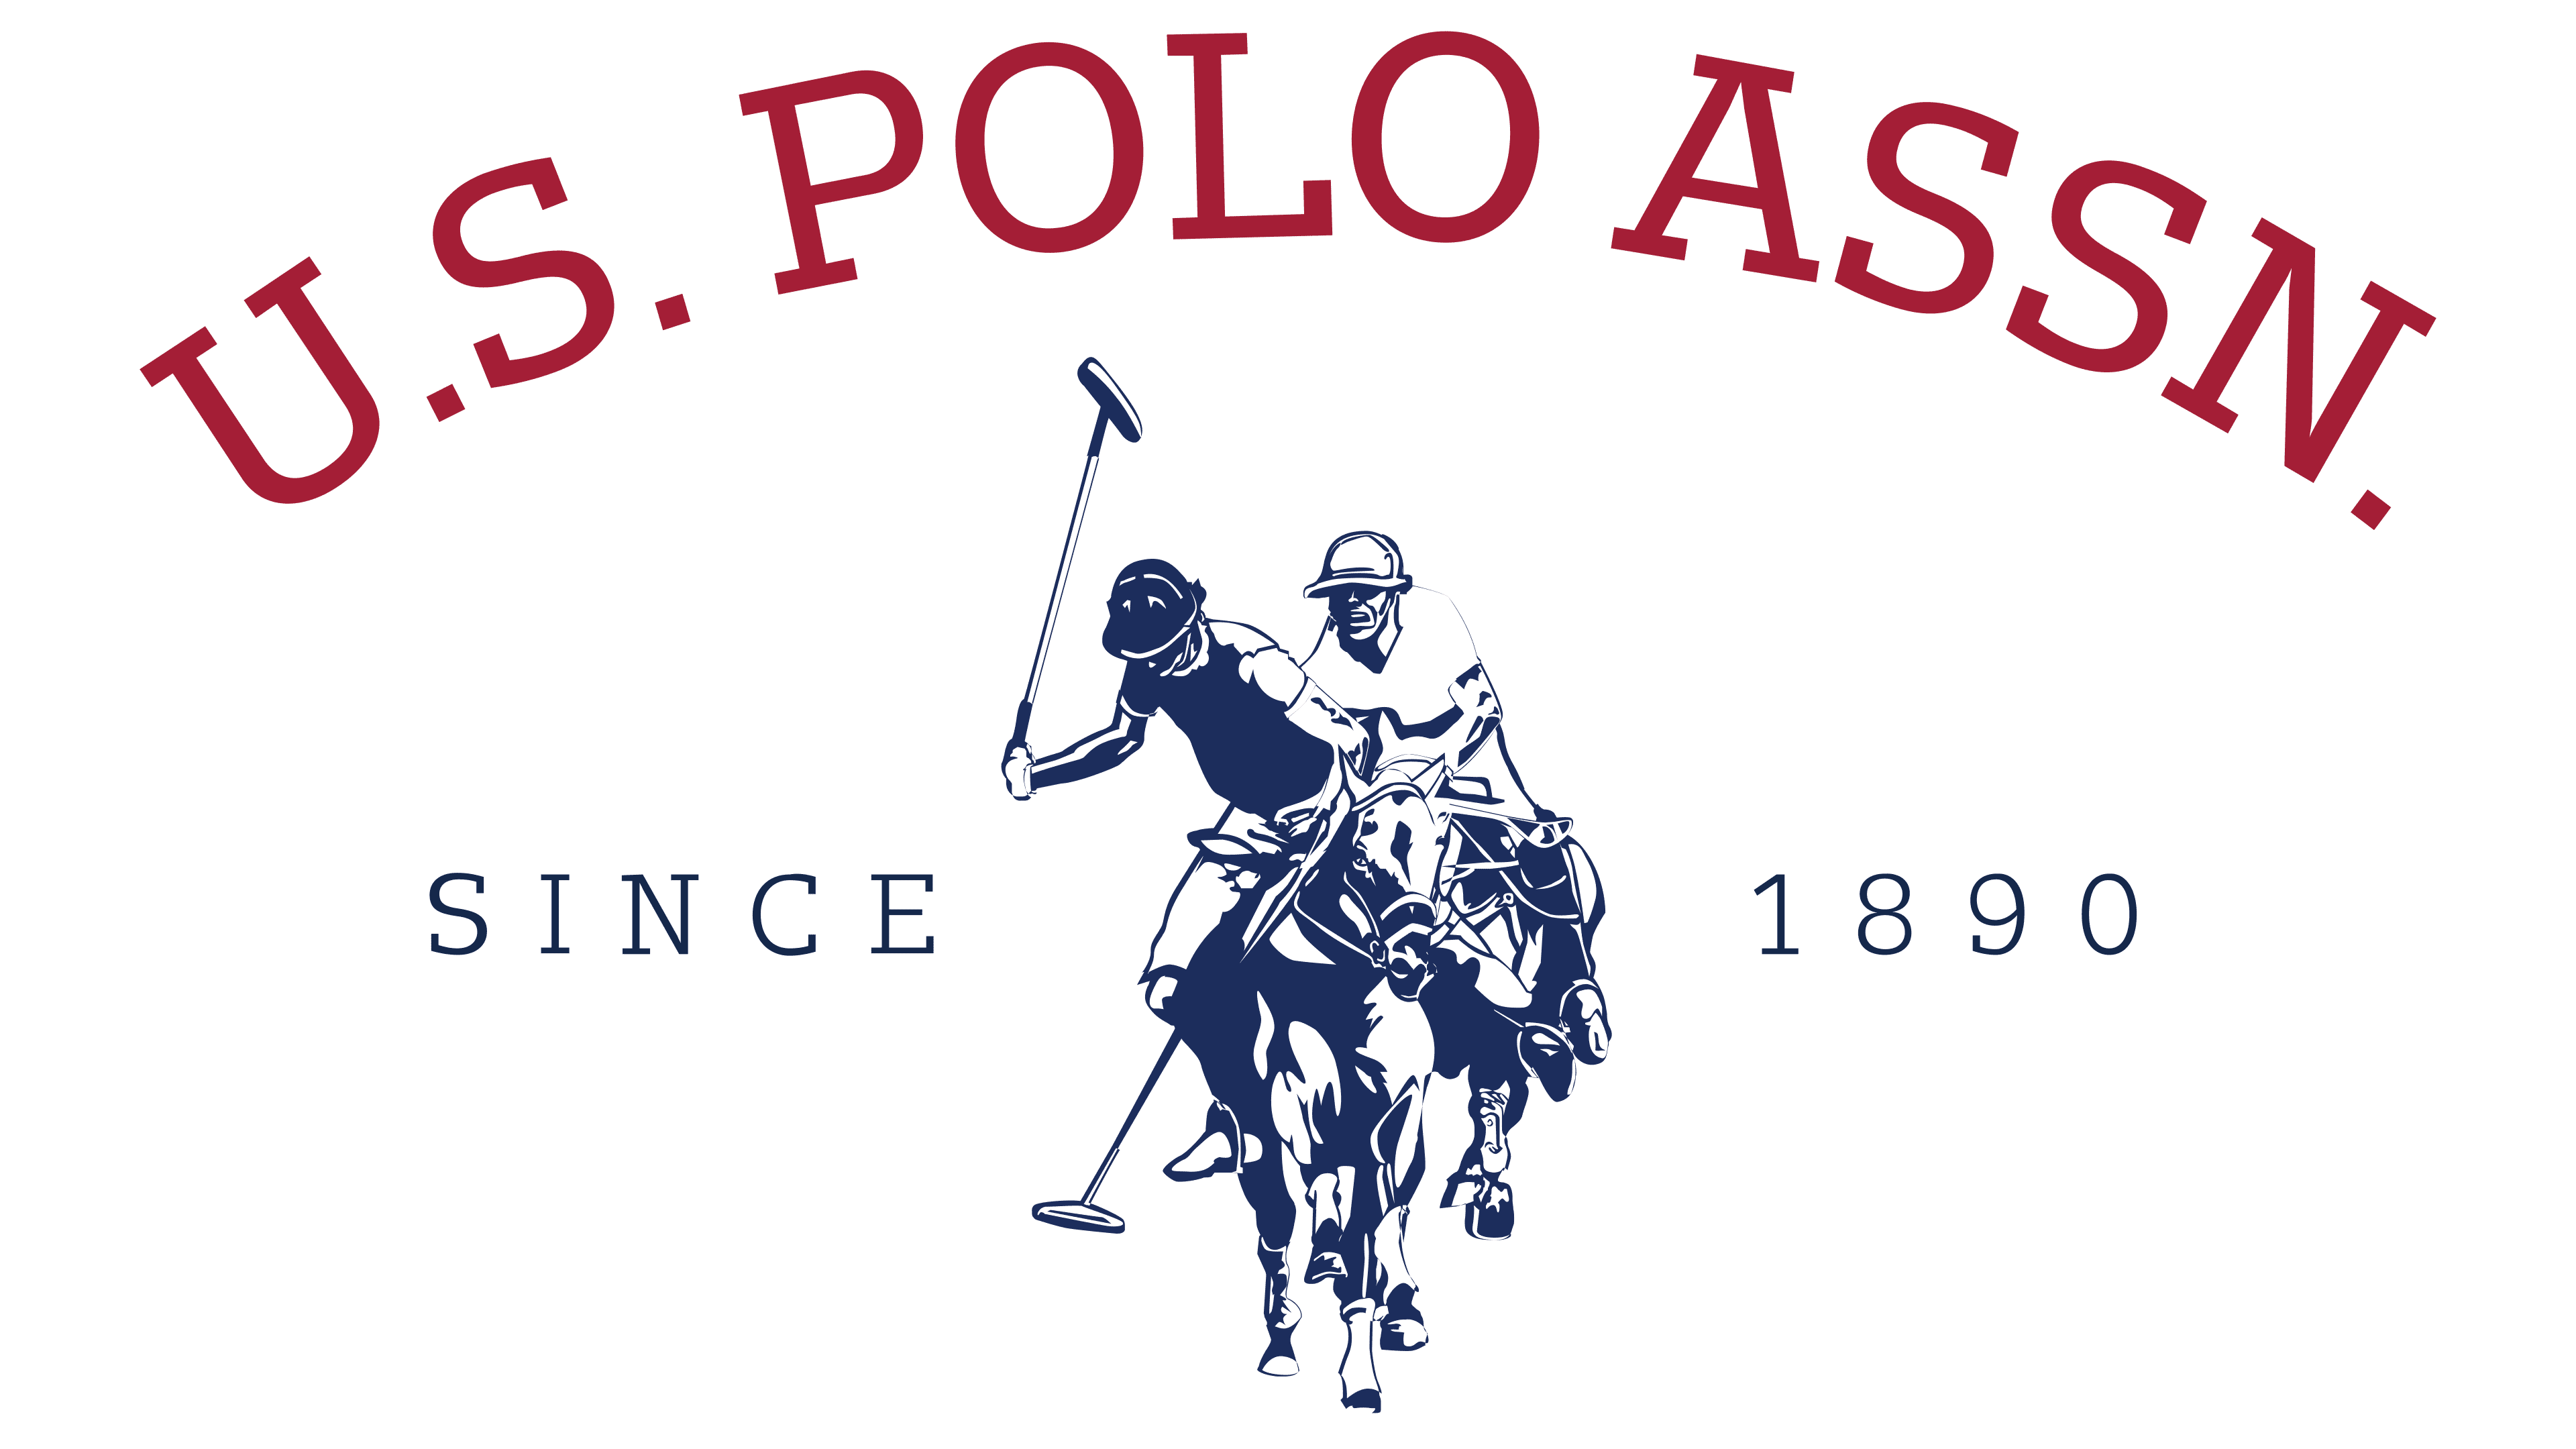 . Polo Assn Logo, symbol, meaning, history, PNG, brand